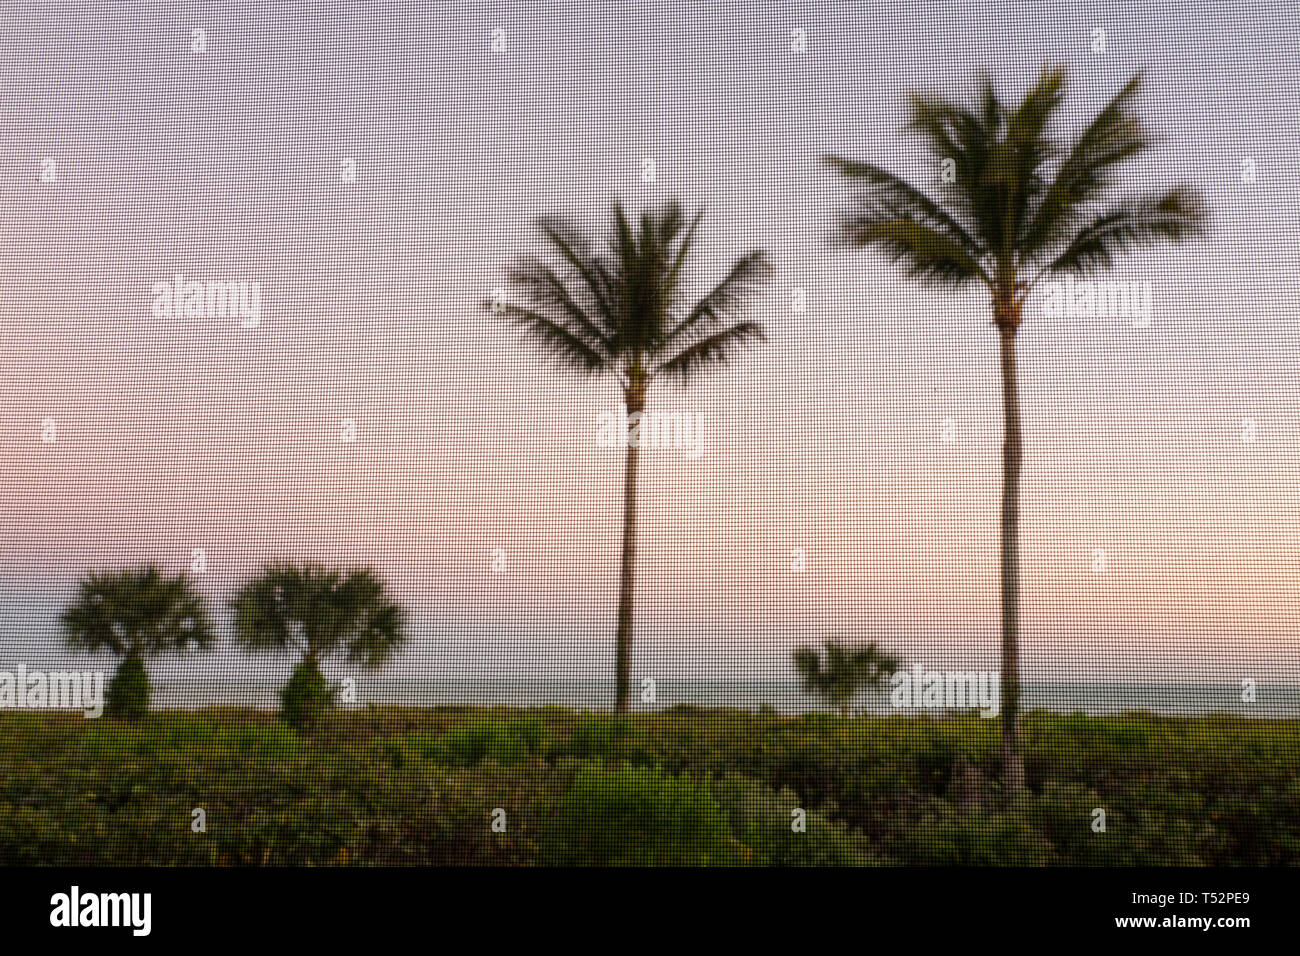 USA, Florida, Sanibel Island, palm trees seen through a screened window with the Gulf of Mexico in the background Stock Photo